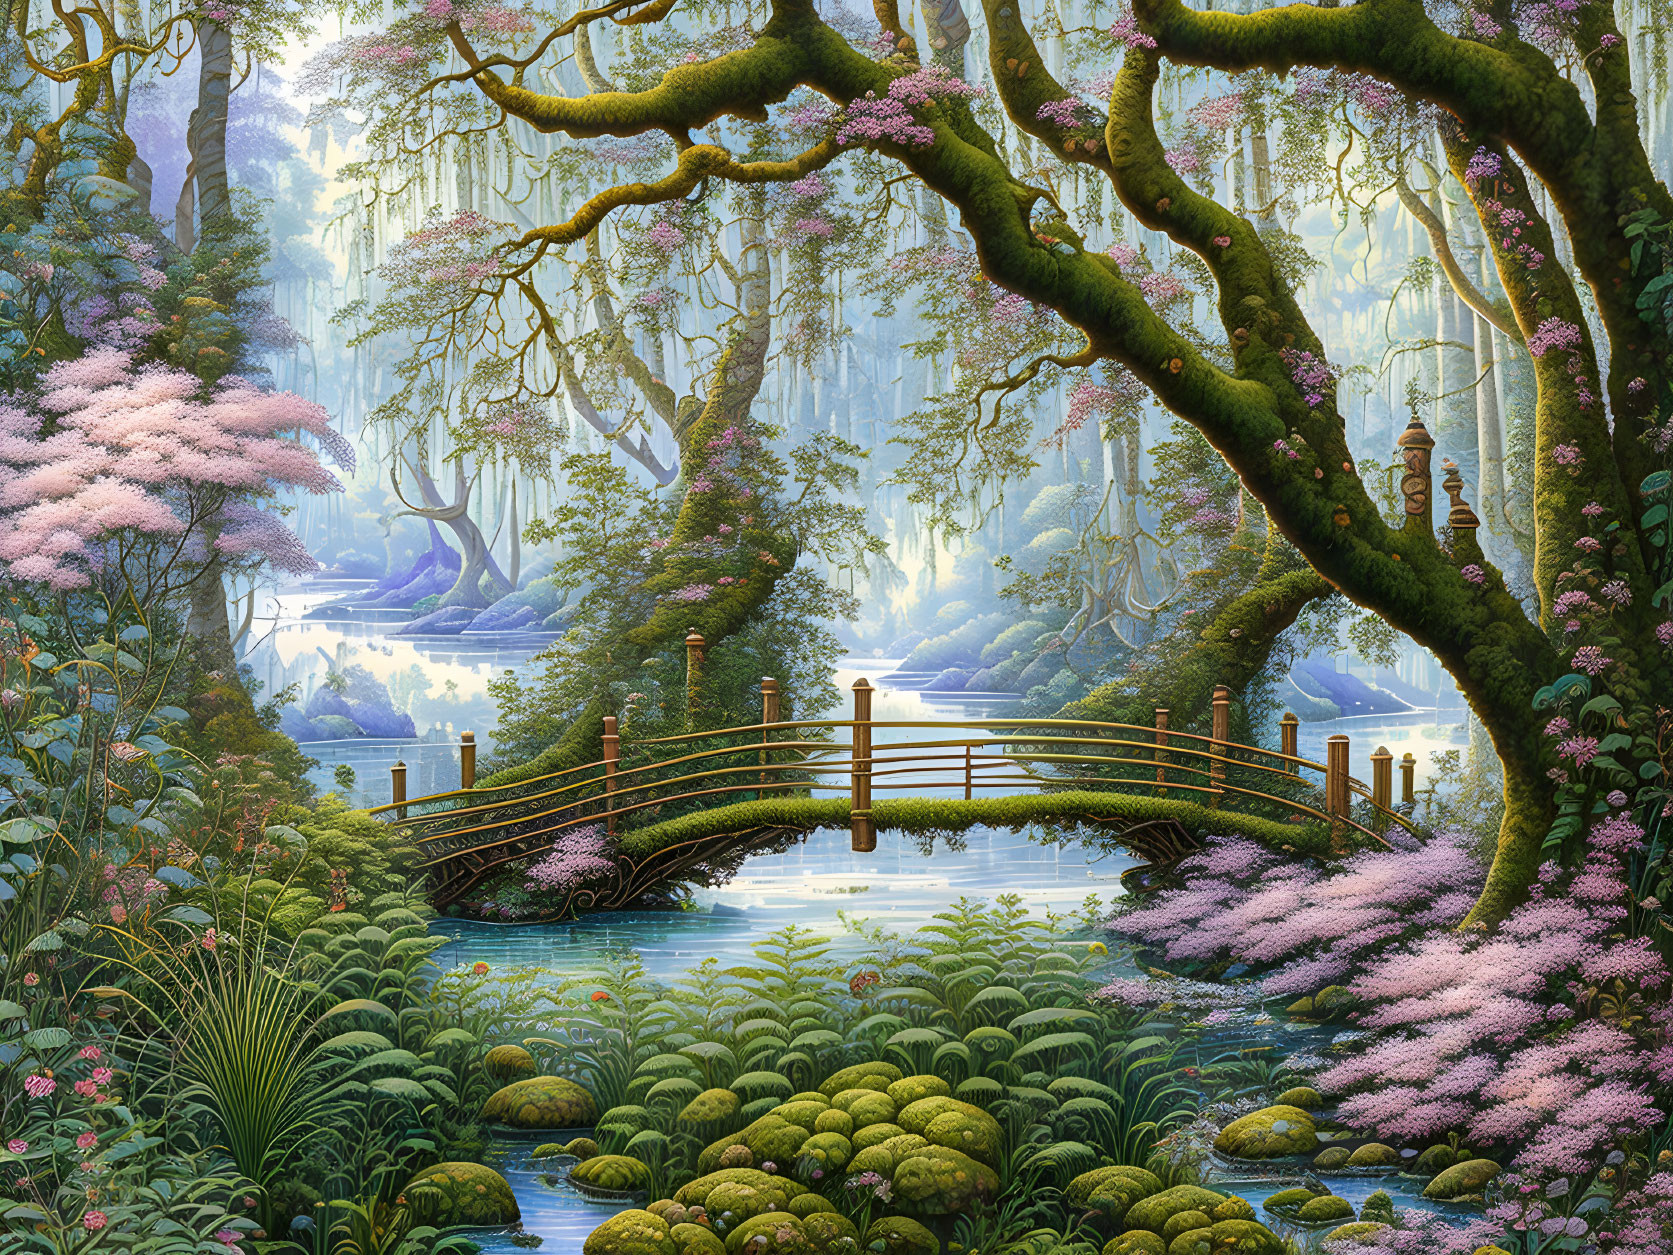 Tranquil forest scene with wooden bridge, pink trees, and mist